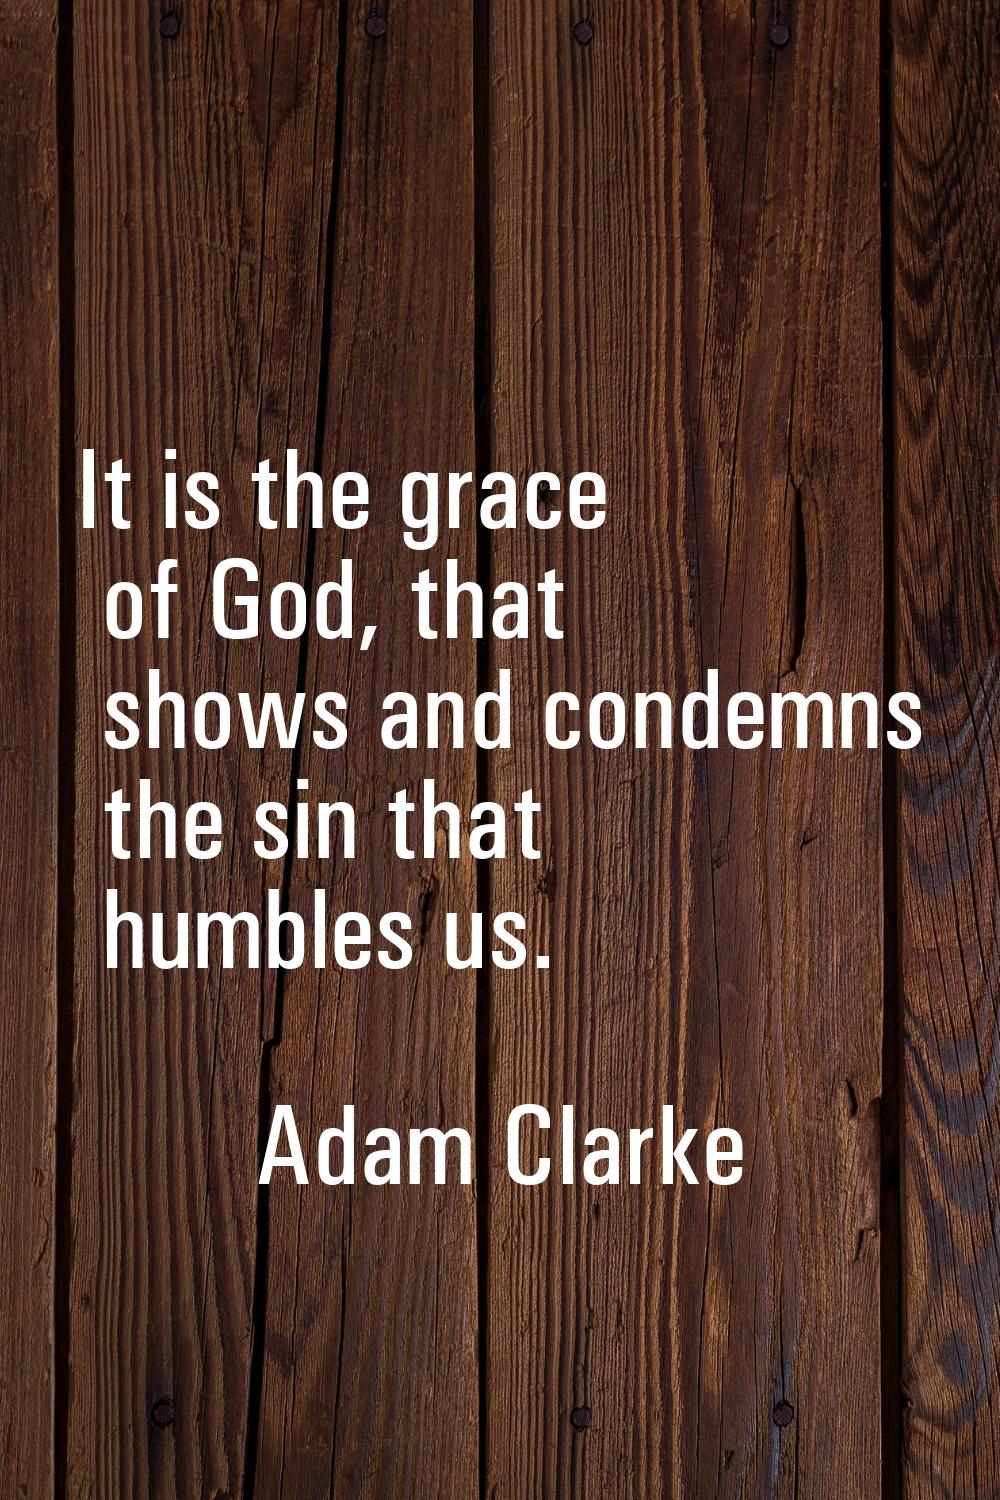 It is the grace of God, that shows and condemns the sin that humbles us.